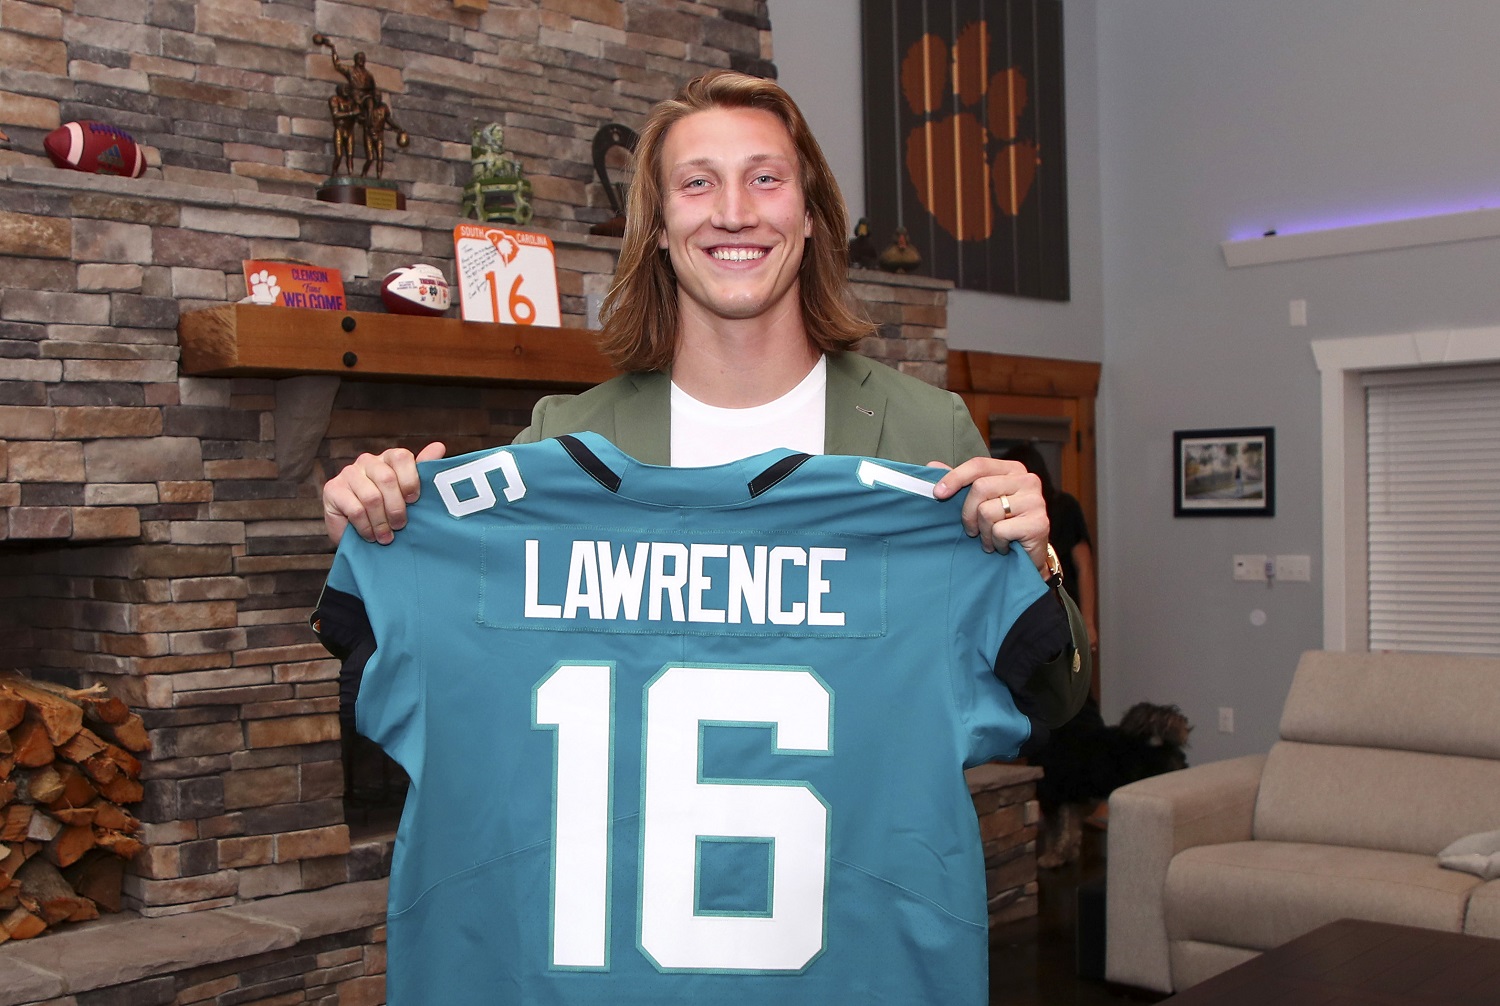 Trevor Lawrence shows his Jacksonville Jaguars jersey after being selected No. 1 overall in the 2021 NFL draft. It's the first step toward what Jaguars fans hope will be a Hall of Fame career.